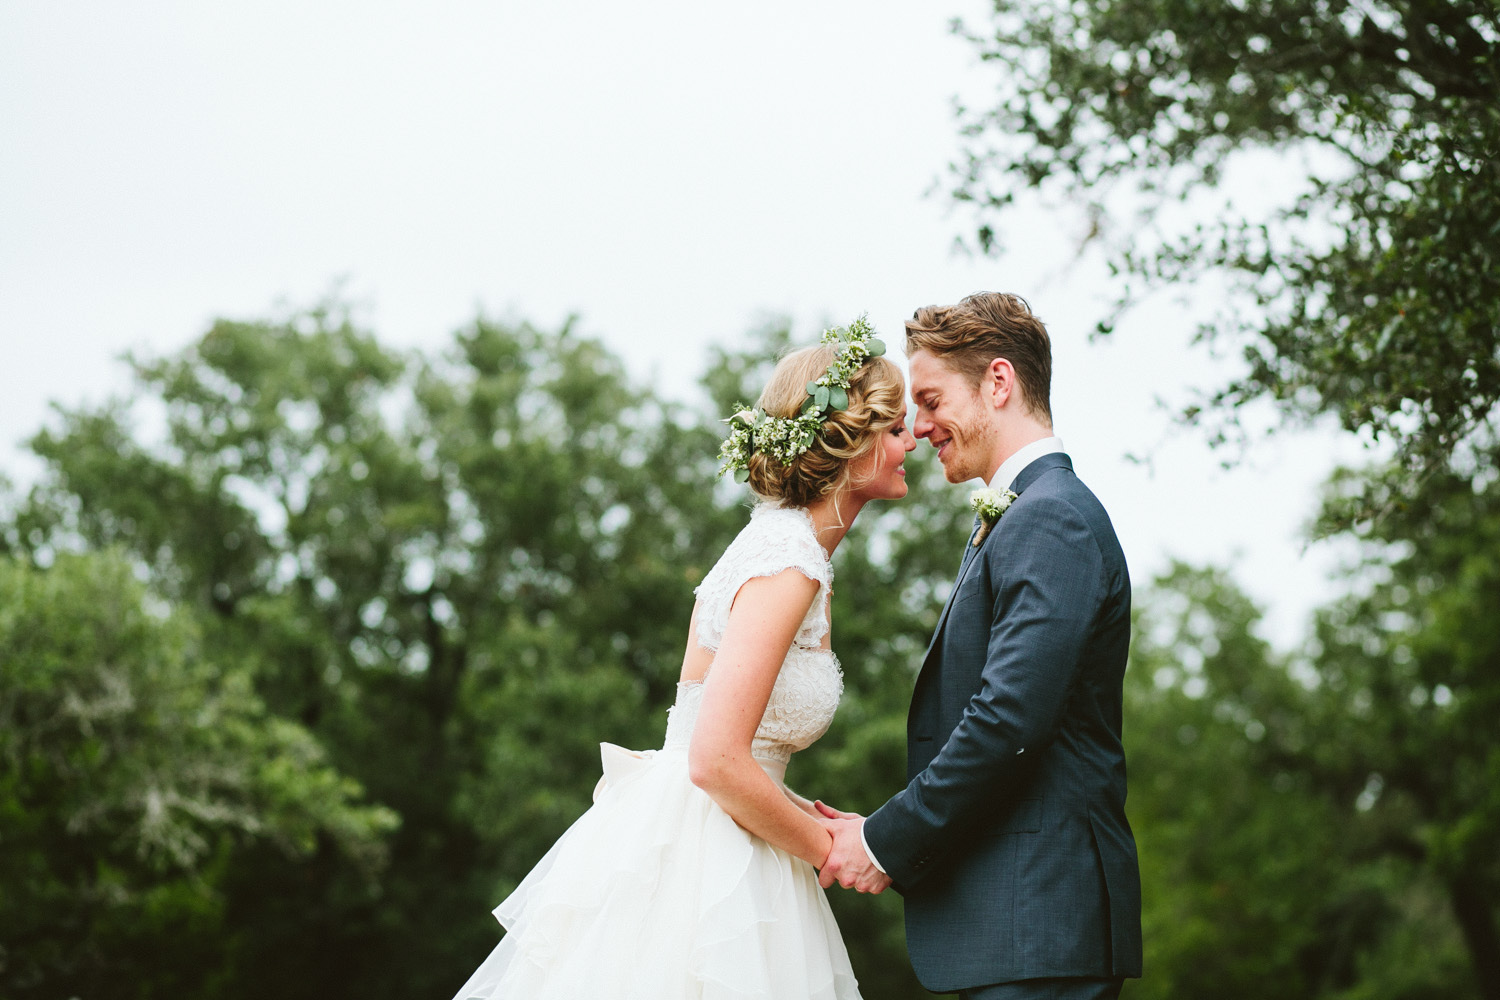 Bride with Flower Crown and Groom | Lisa Woods Photography